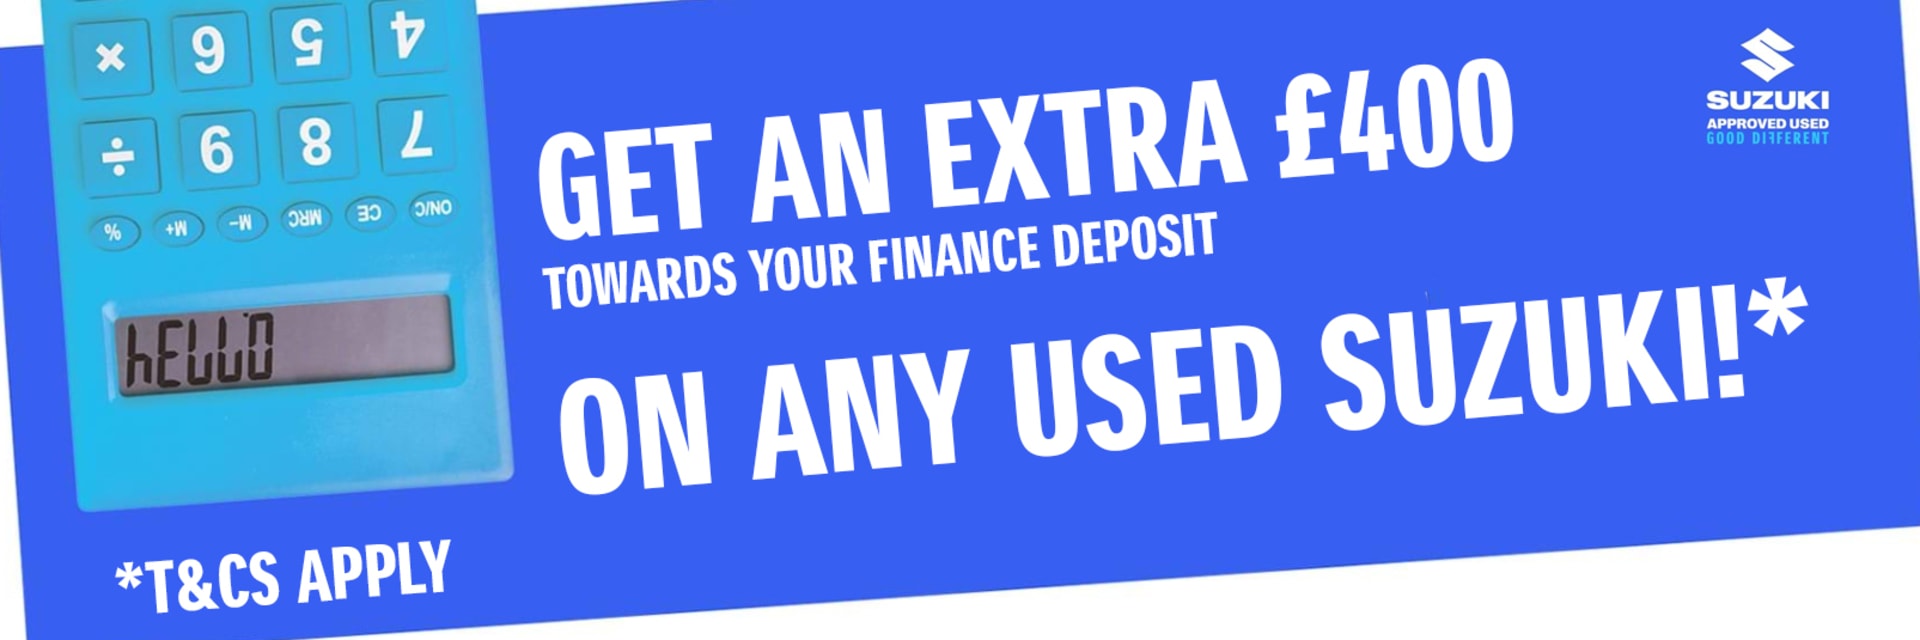 Get £400 towards your finance on any used Suzuki!